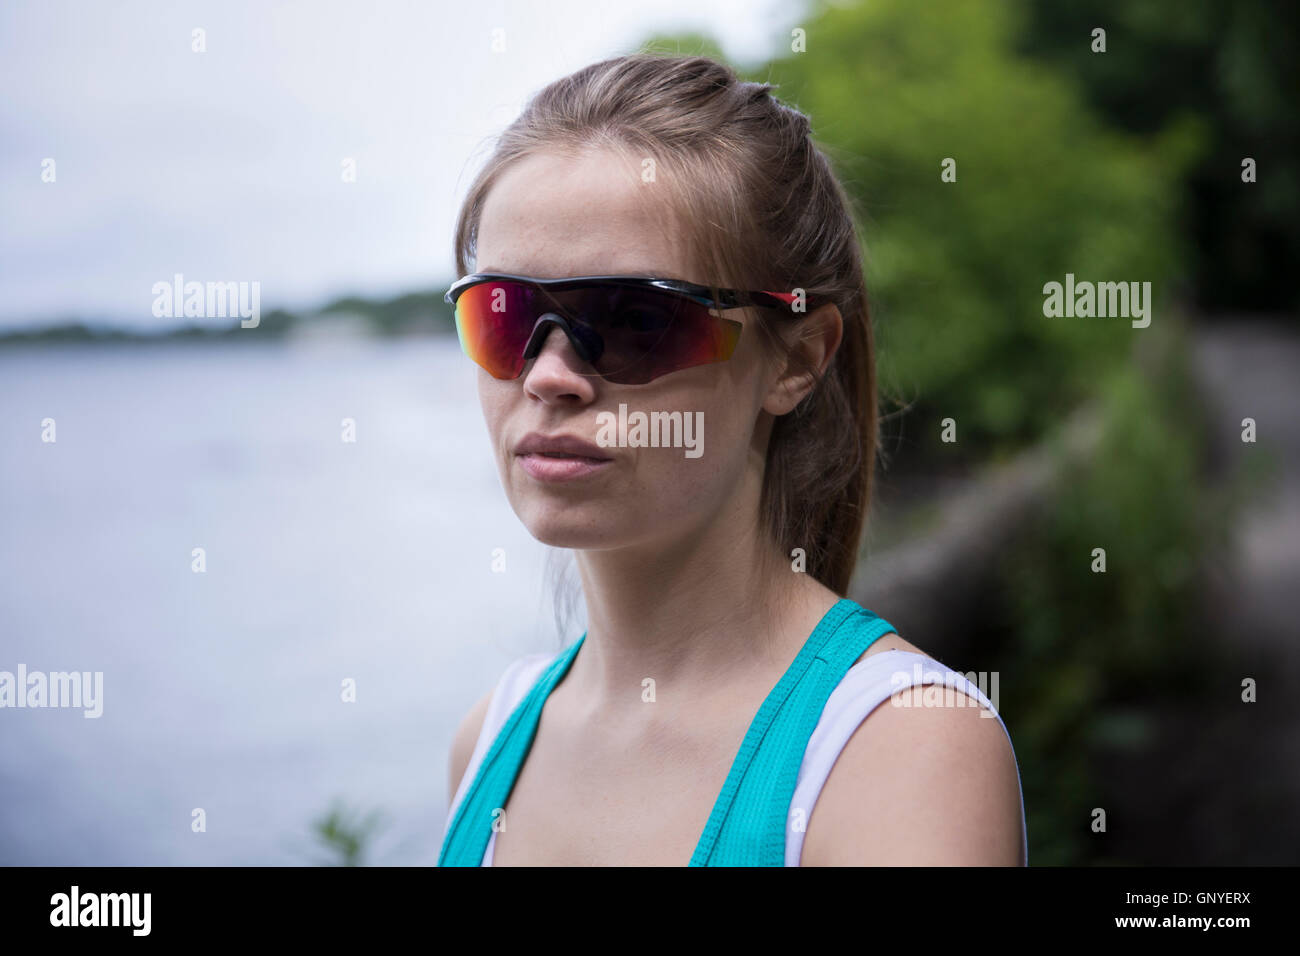 Portrait of a sporty woman outdoors. Action and healthy lifestyle concept. Stock Photo